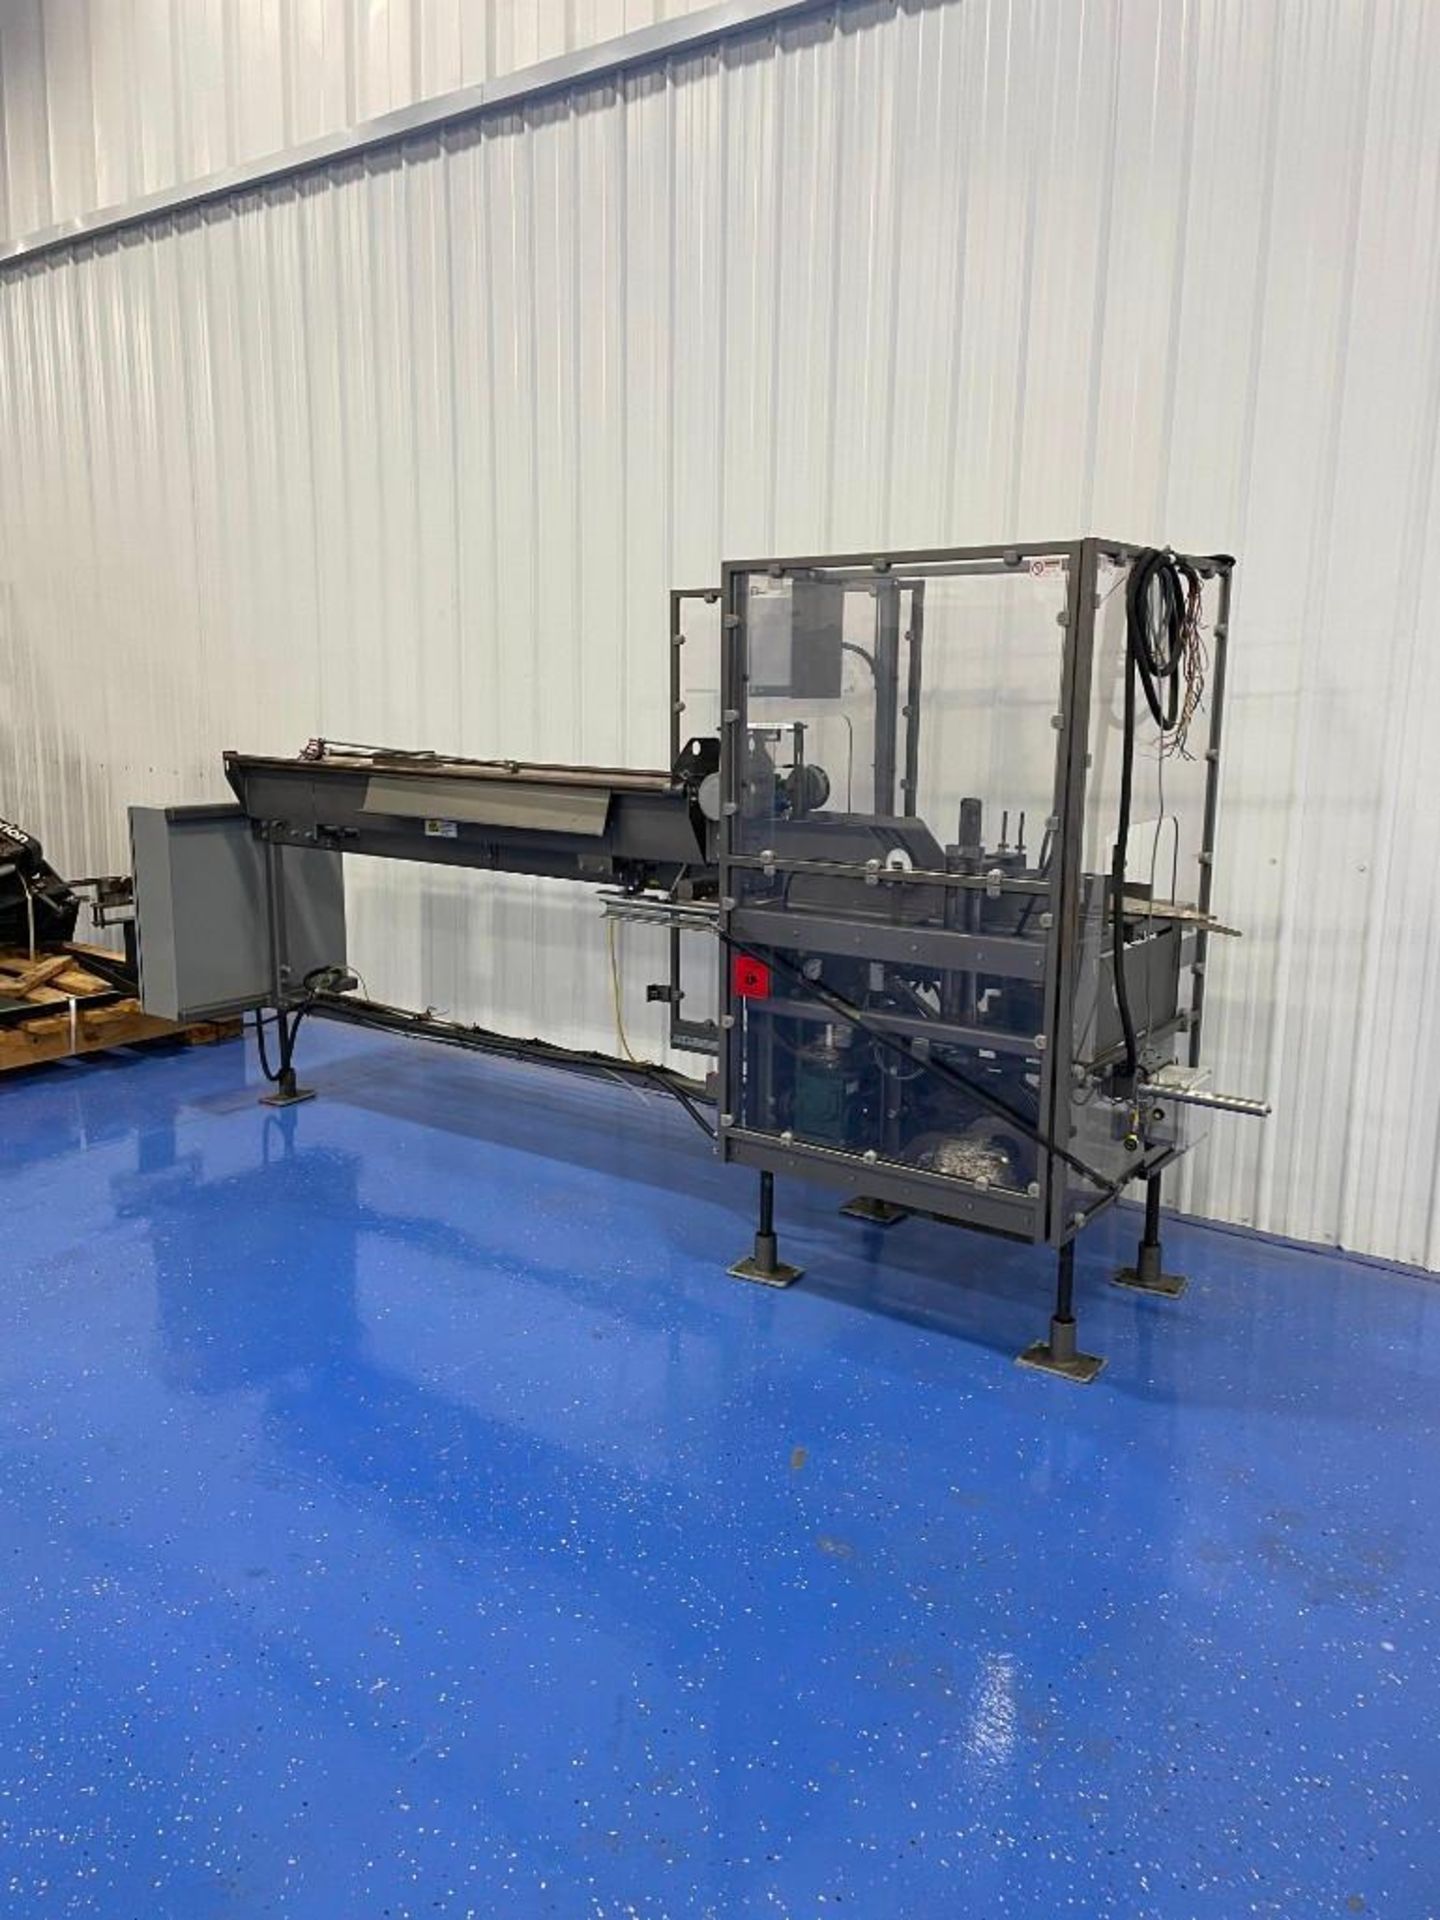 2008 Pearson BE60 6-Pack Beverage Carrier Erector with Twin Lane Conveyor - Image 2 of 17